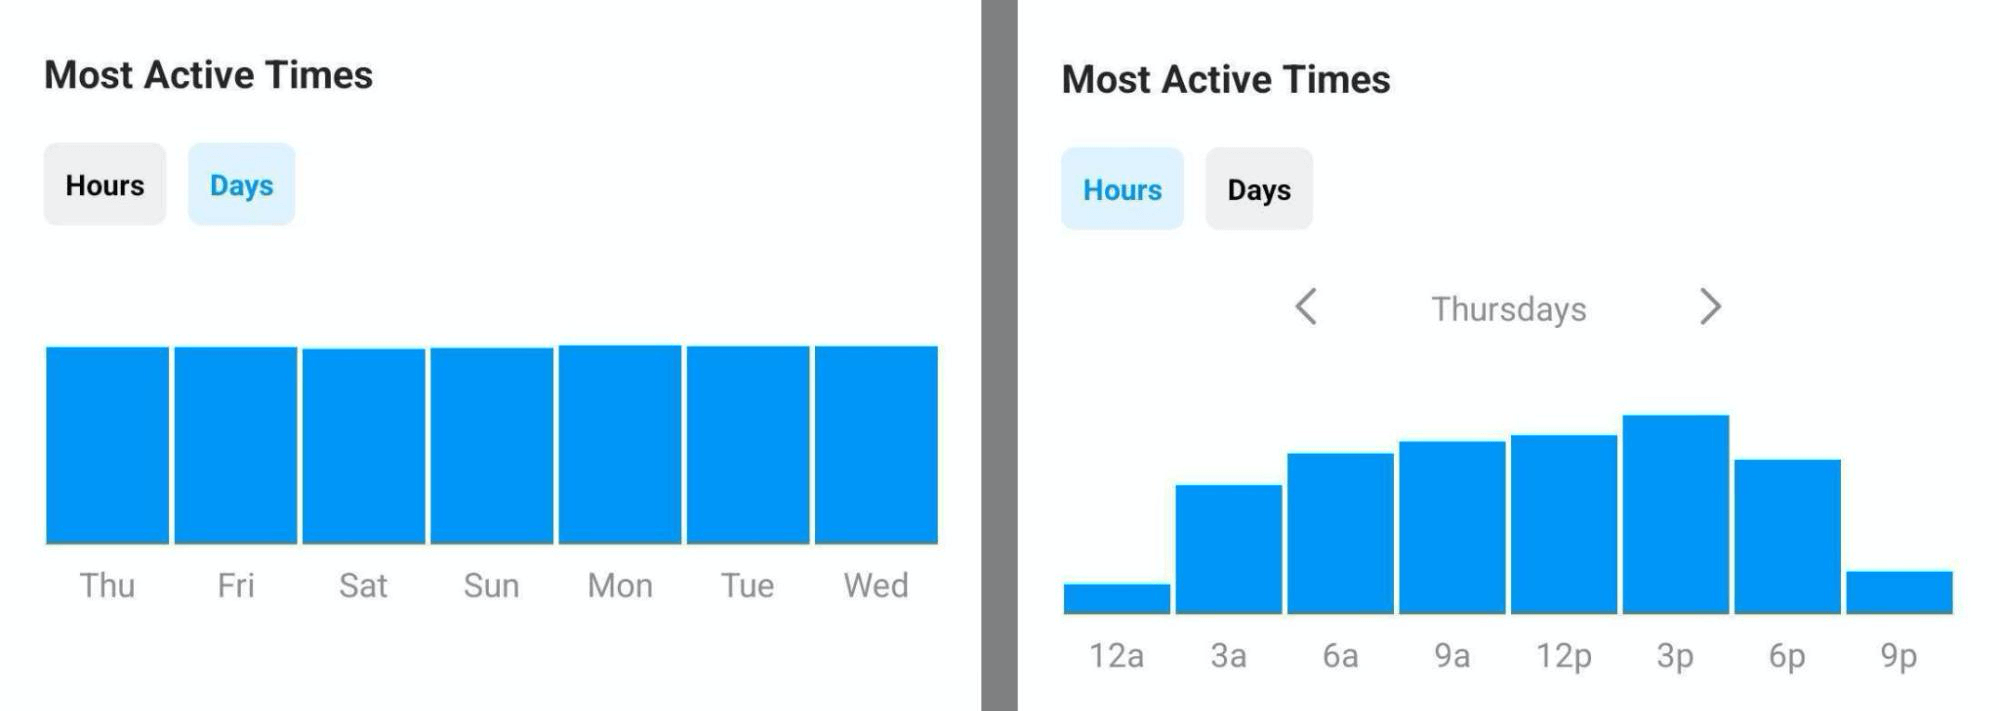 image of Most Active Times data in Instagram Insights